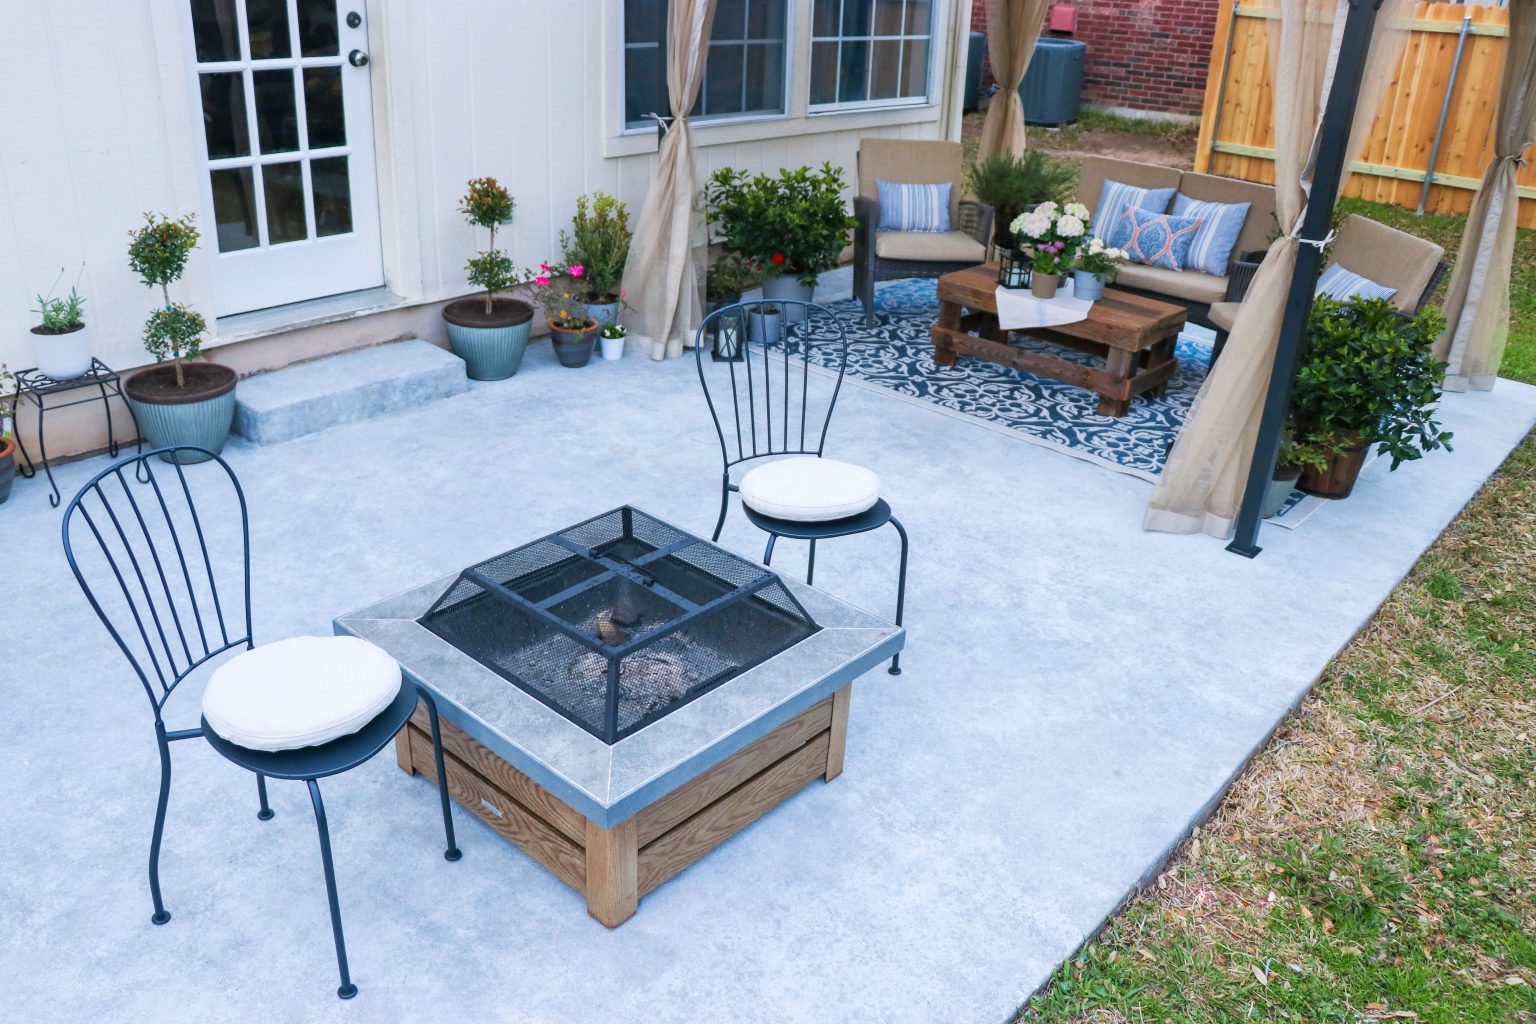 When Can I Put Patio Furniture On New Concrete?